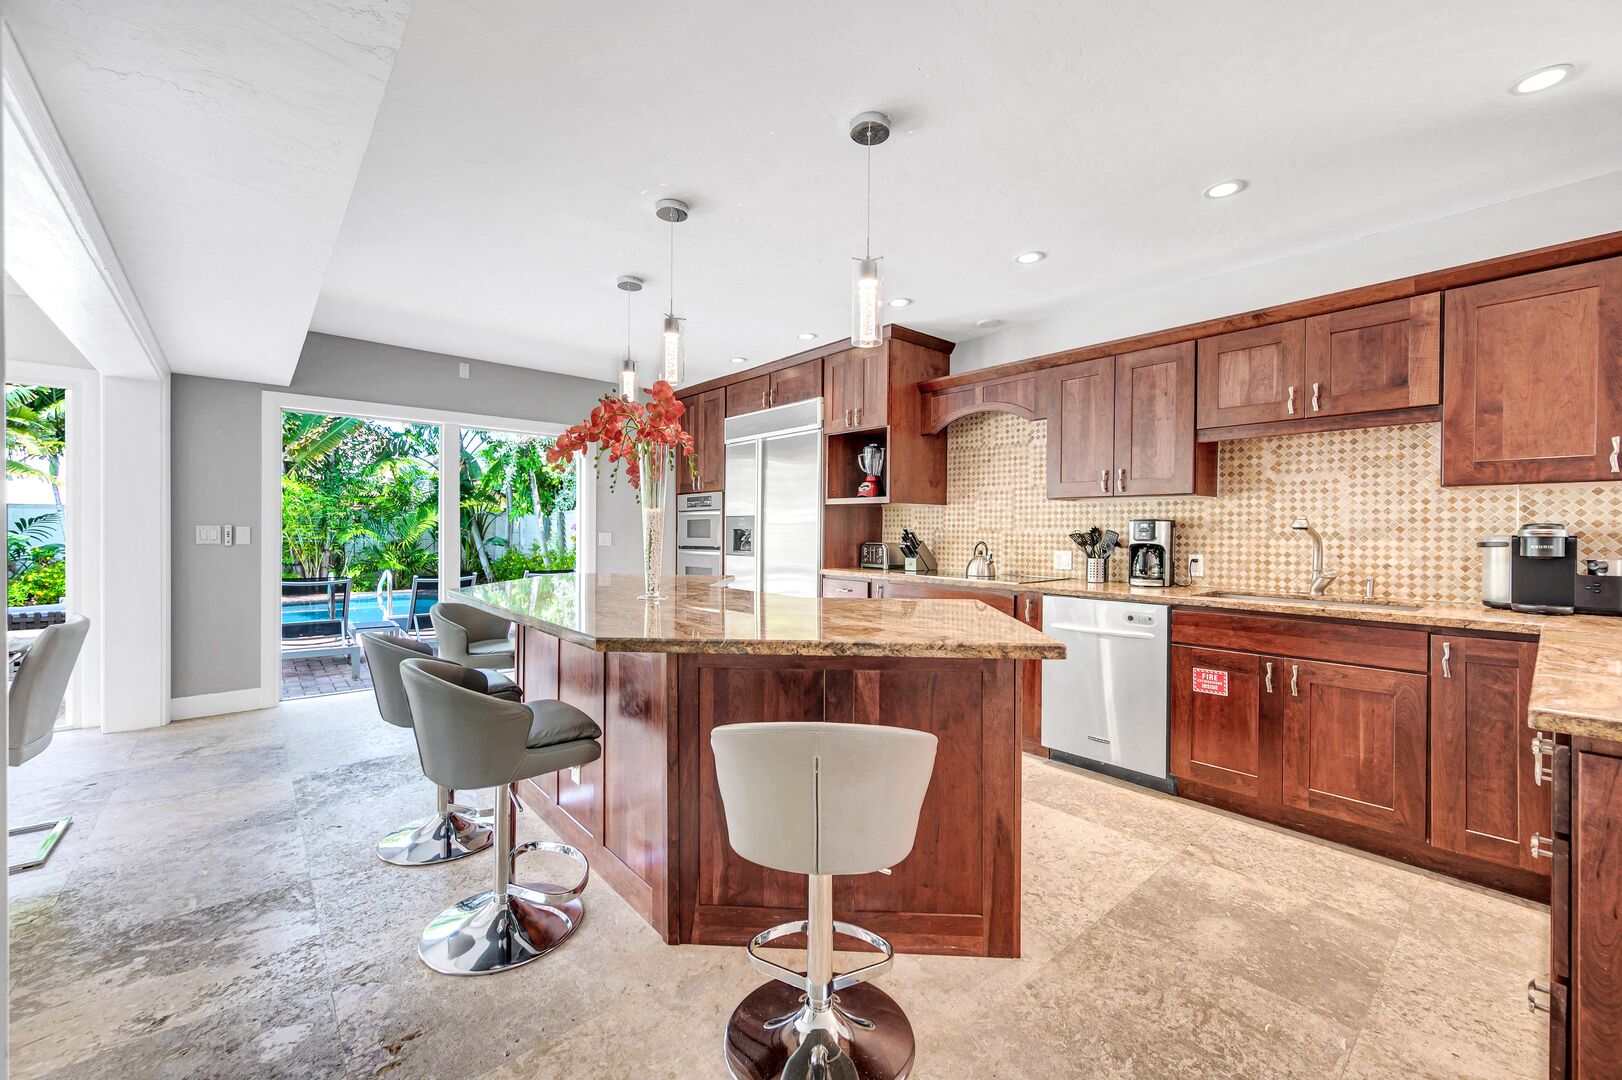 The kitchen comes with sleek countertops, modern appliances and bar seating for seven people.